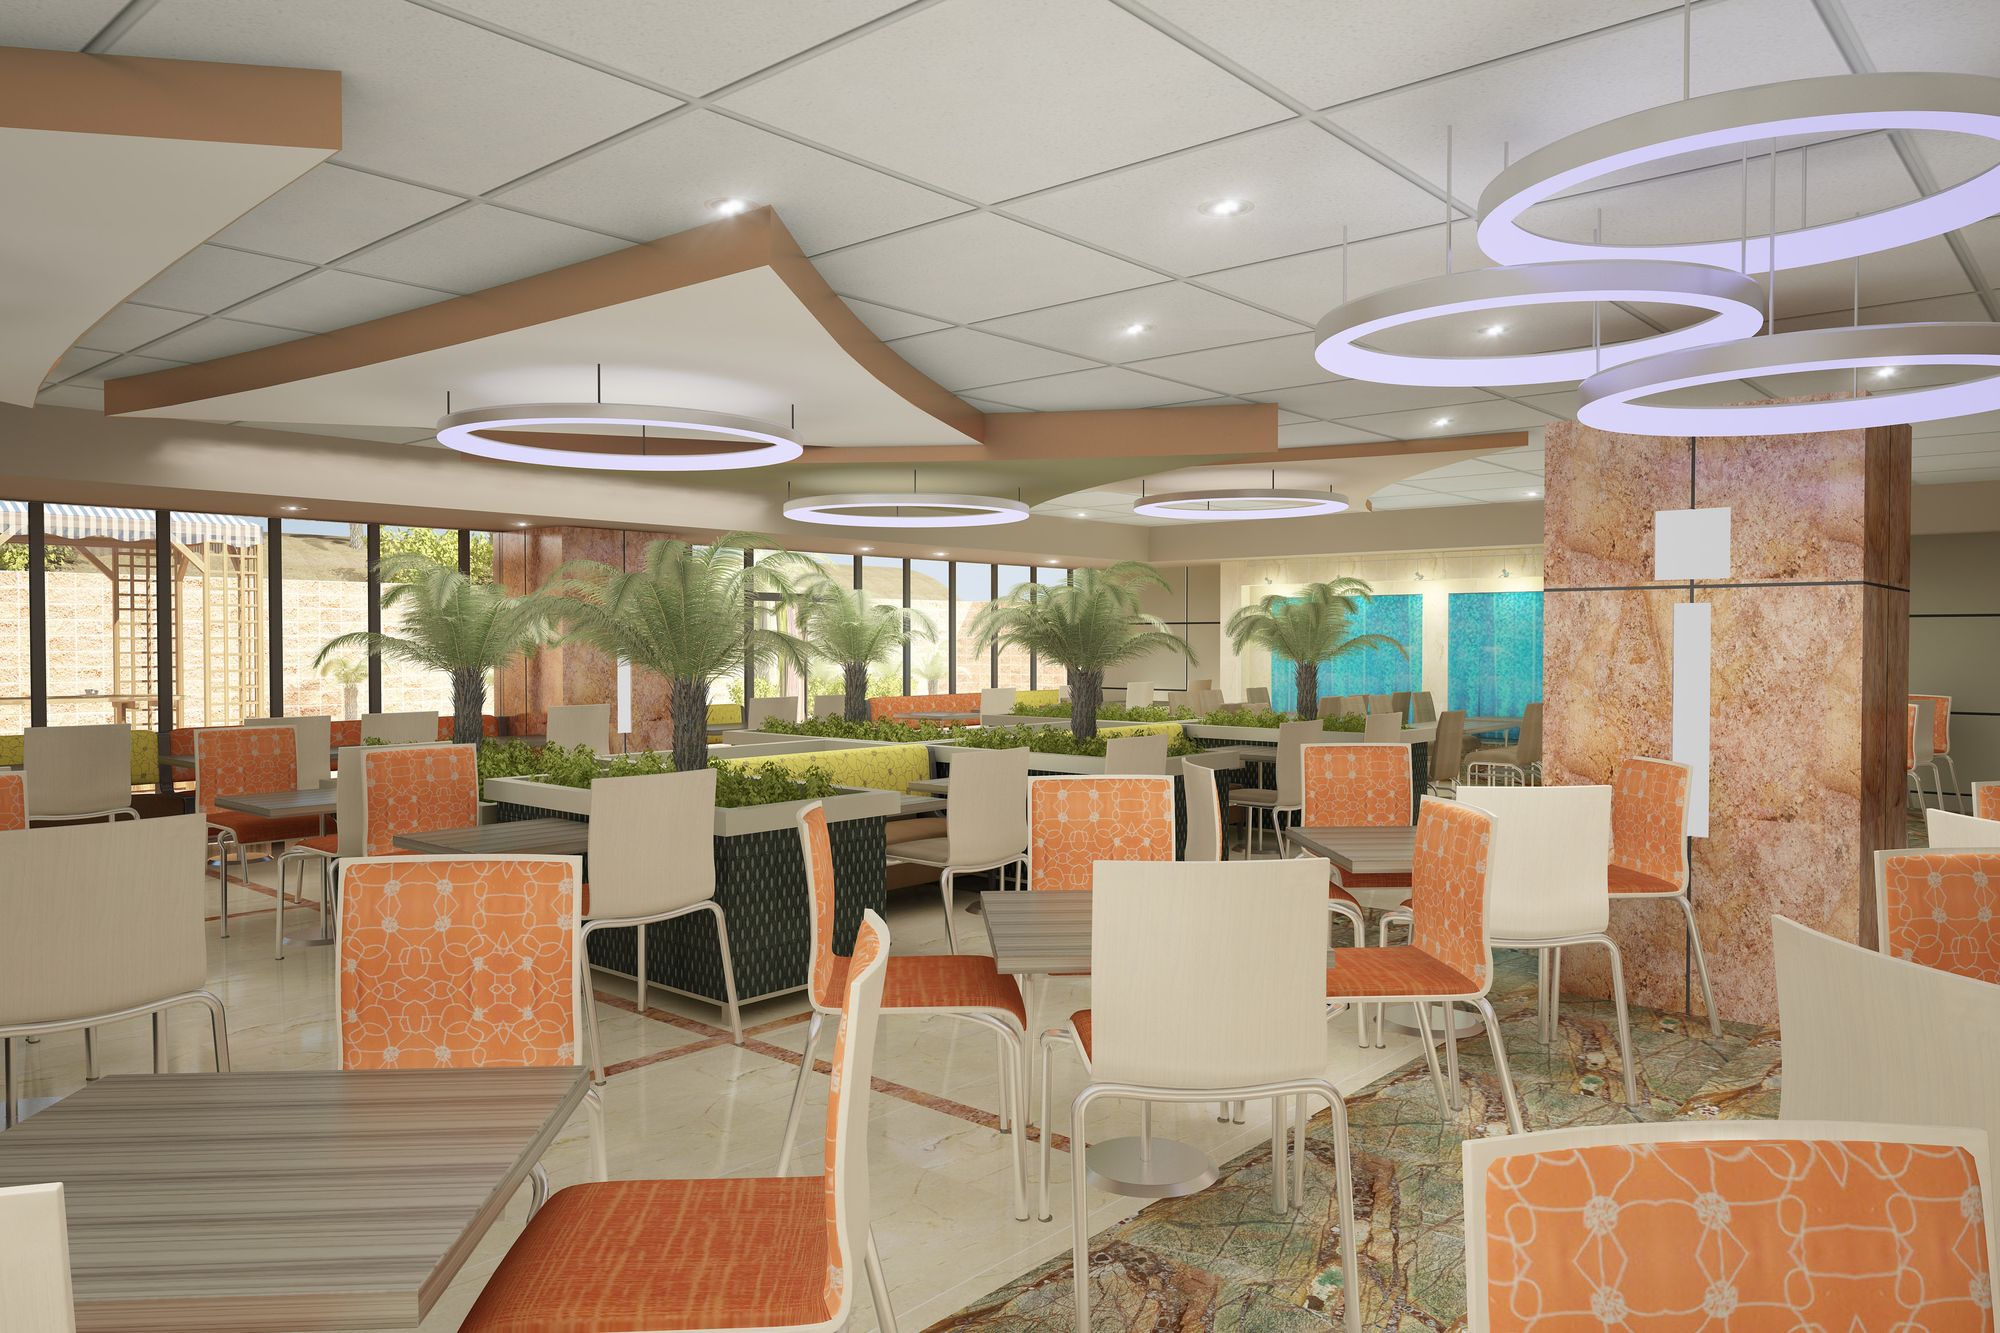 Dining area rendering